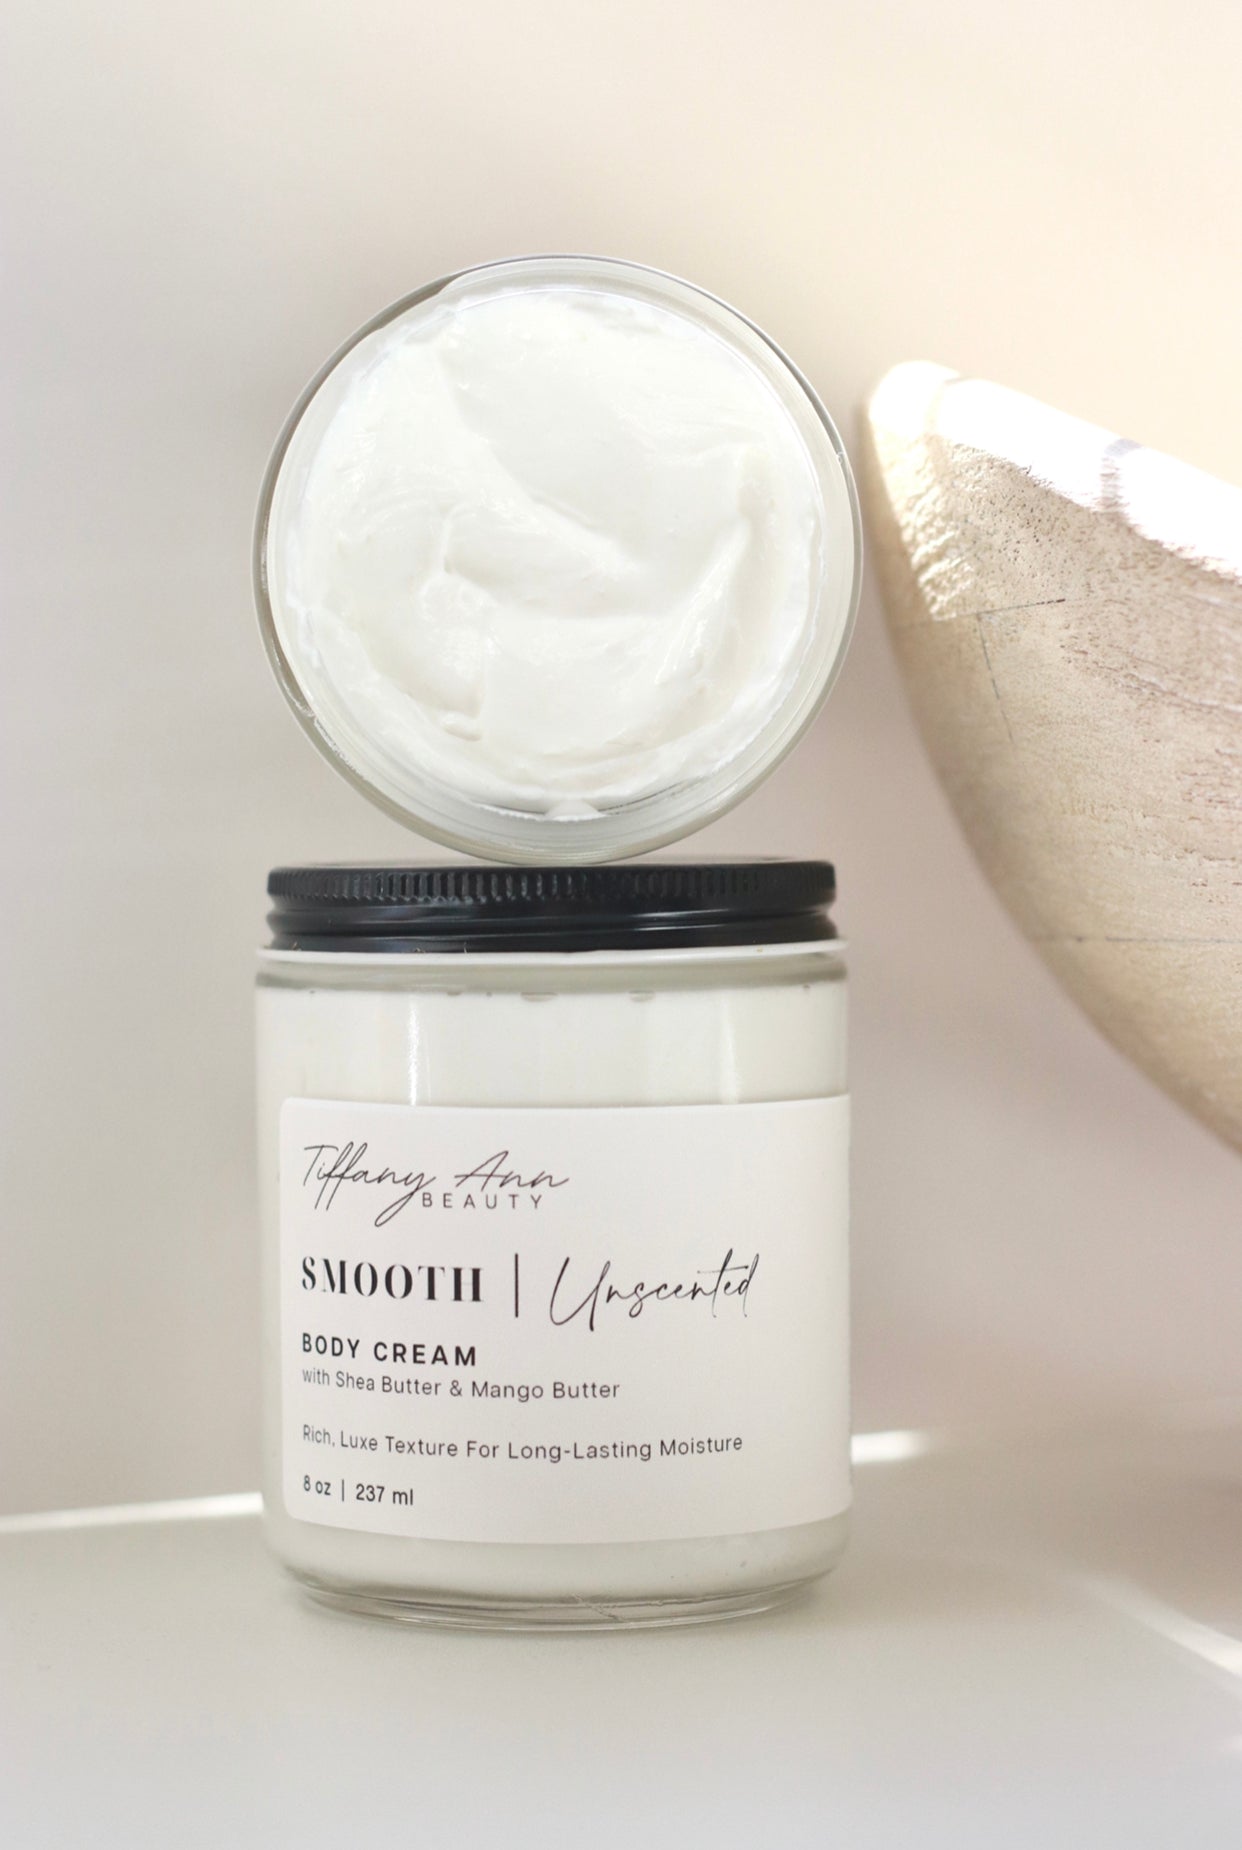 SMOOTH | UNSCENTED BODY CREAM